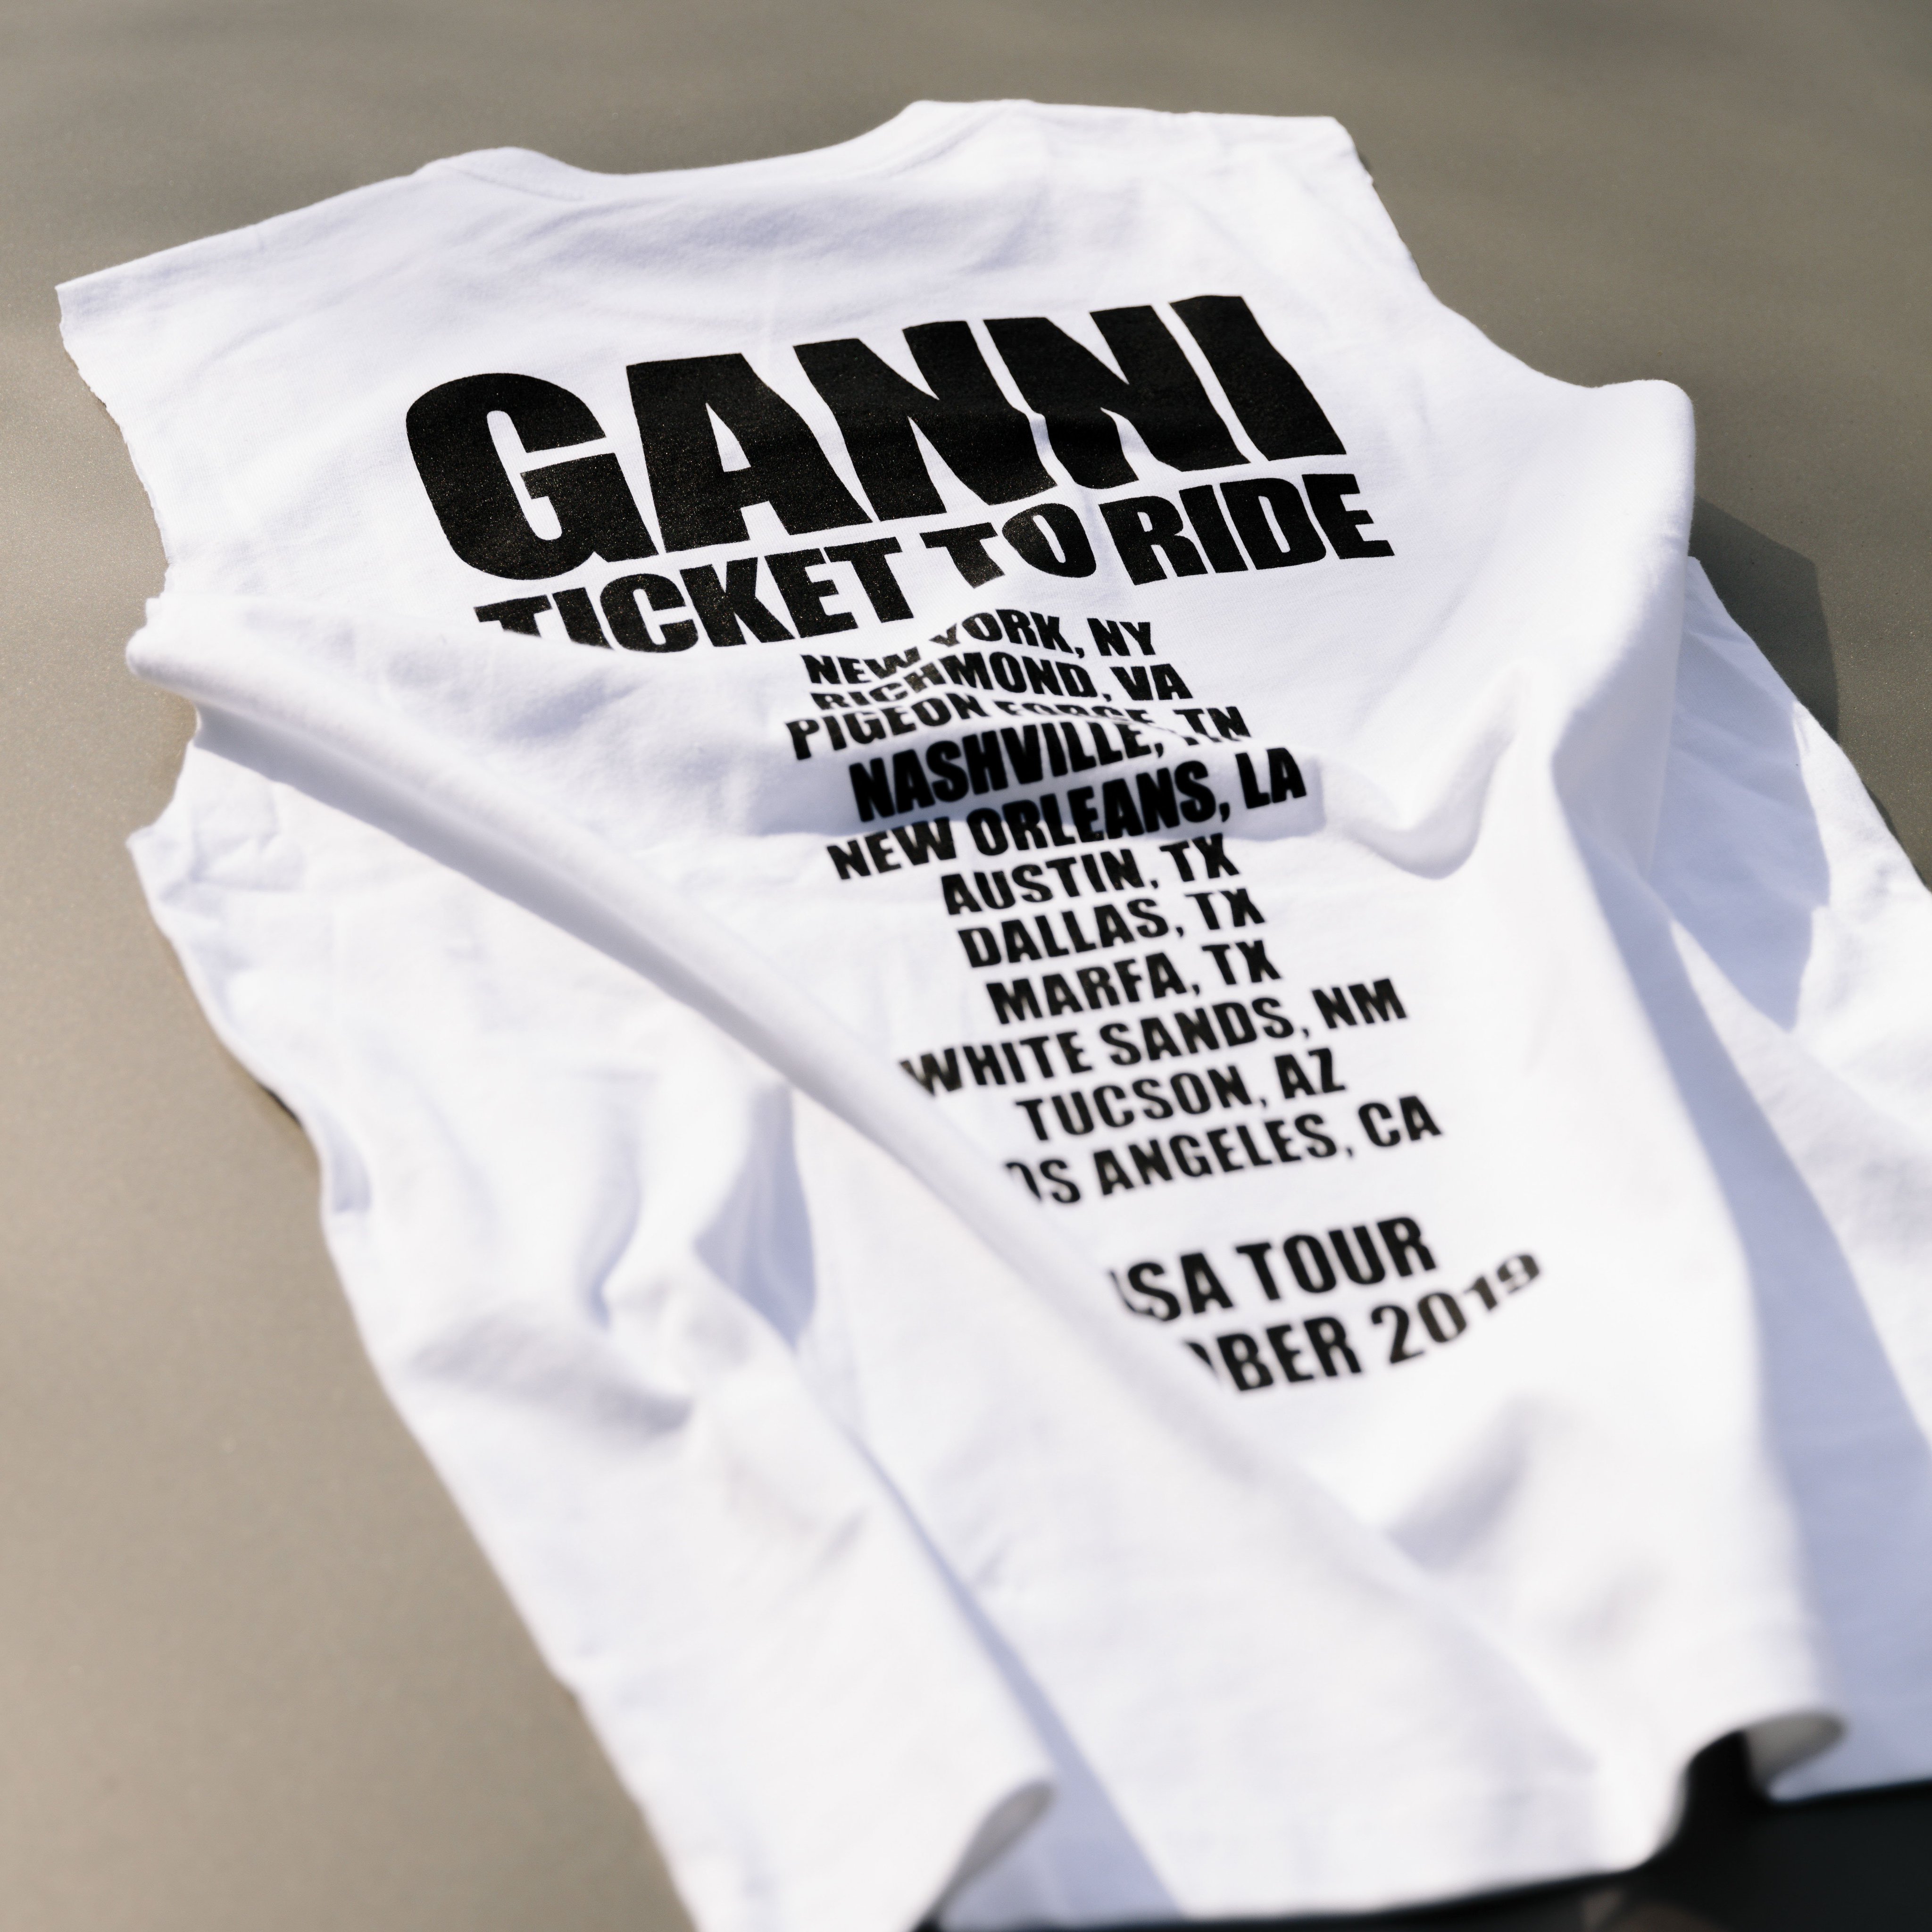 Hypebae on Twitter: "#GANNI is hitting the road on their “GANNI TICKET TO  RIDE TOUR” all across North America to celebrate its new flagship stores in  New York City and Los Angeles.